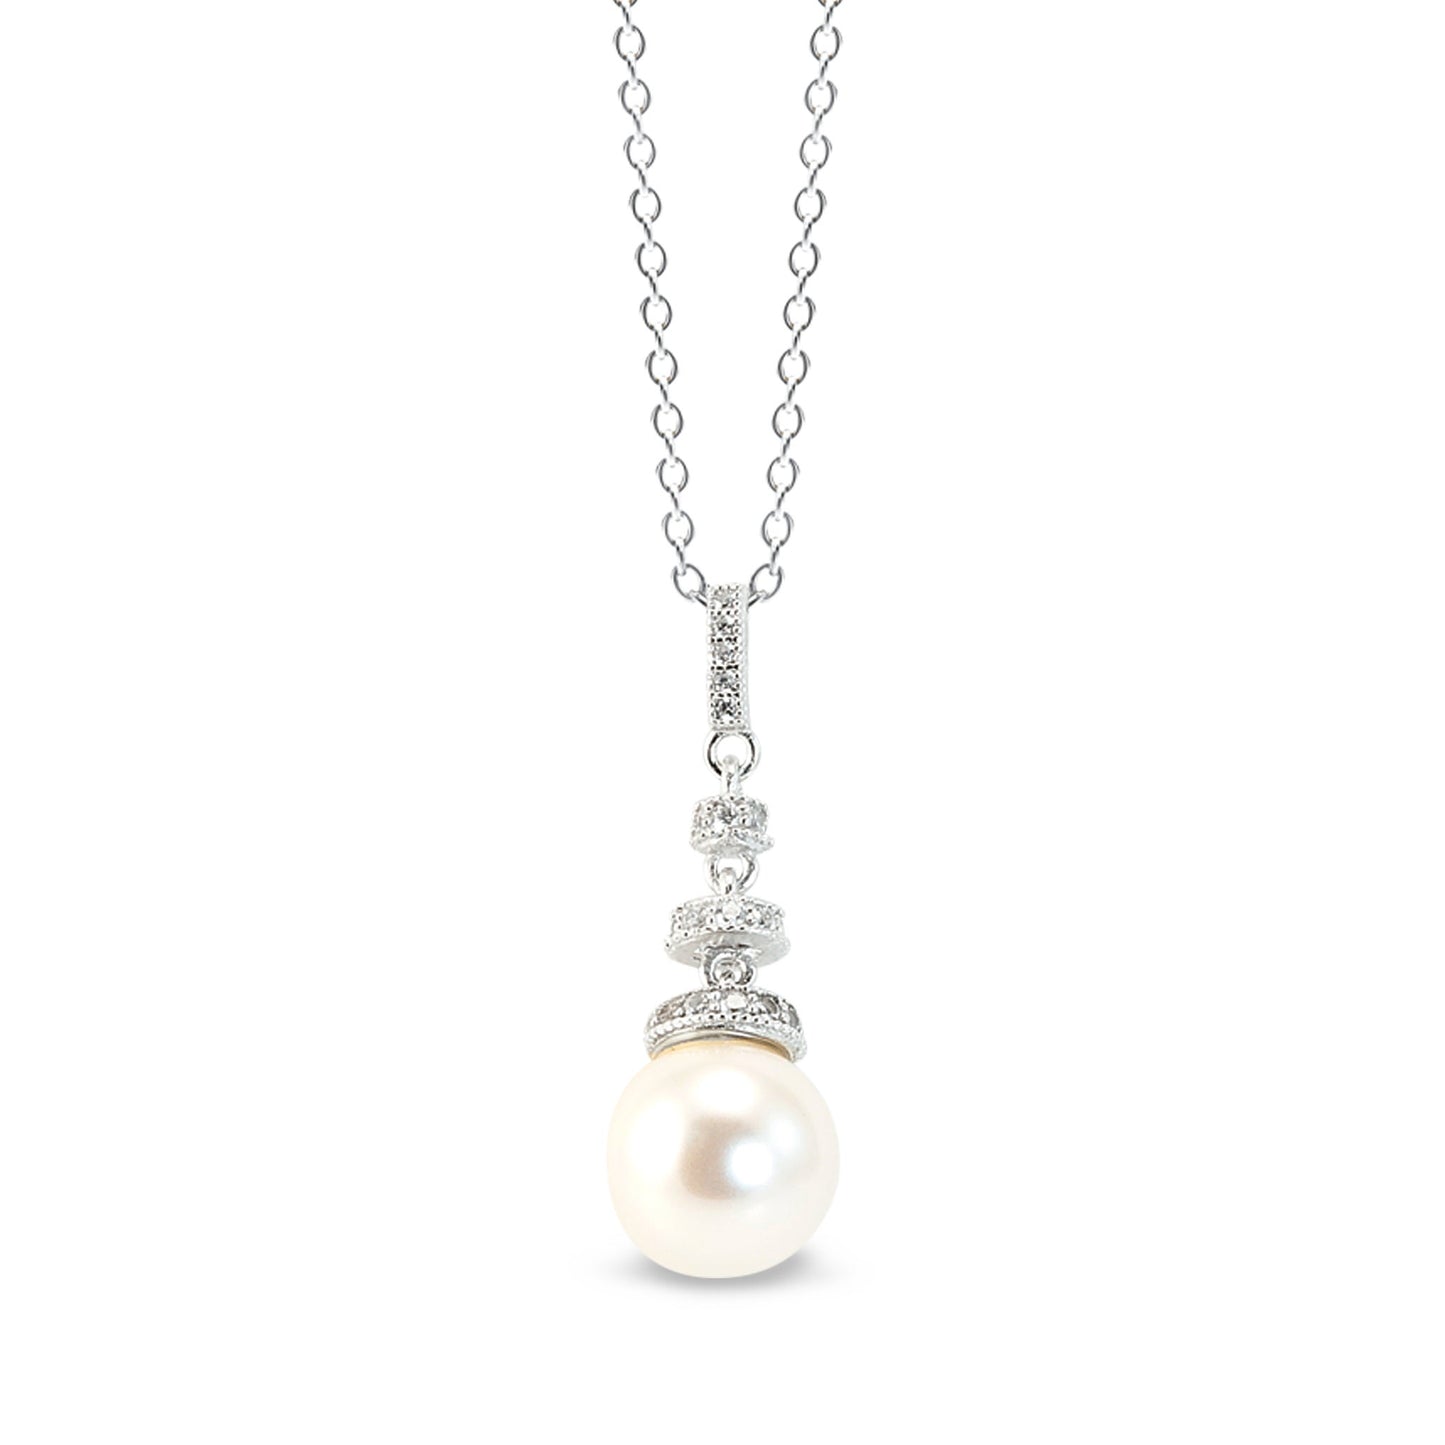 A round pearl drop pendant with simulated diamonds displayed on a neutral white background.